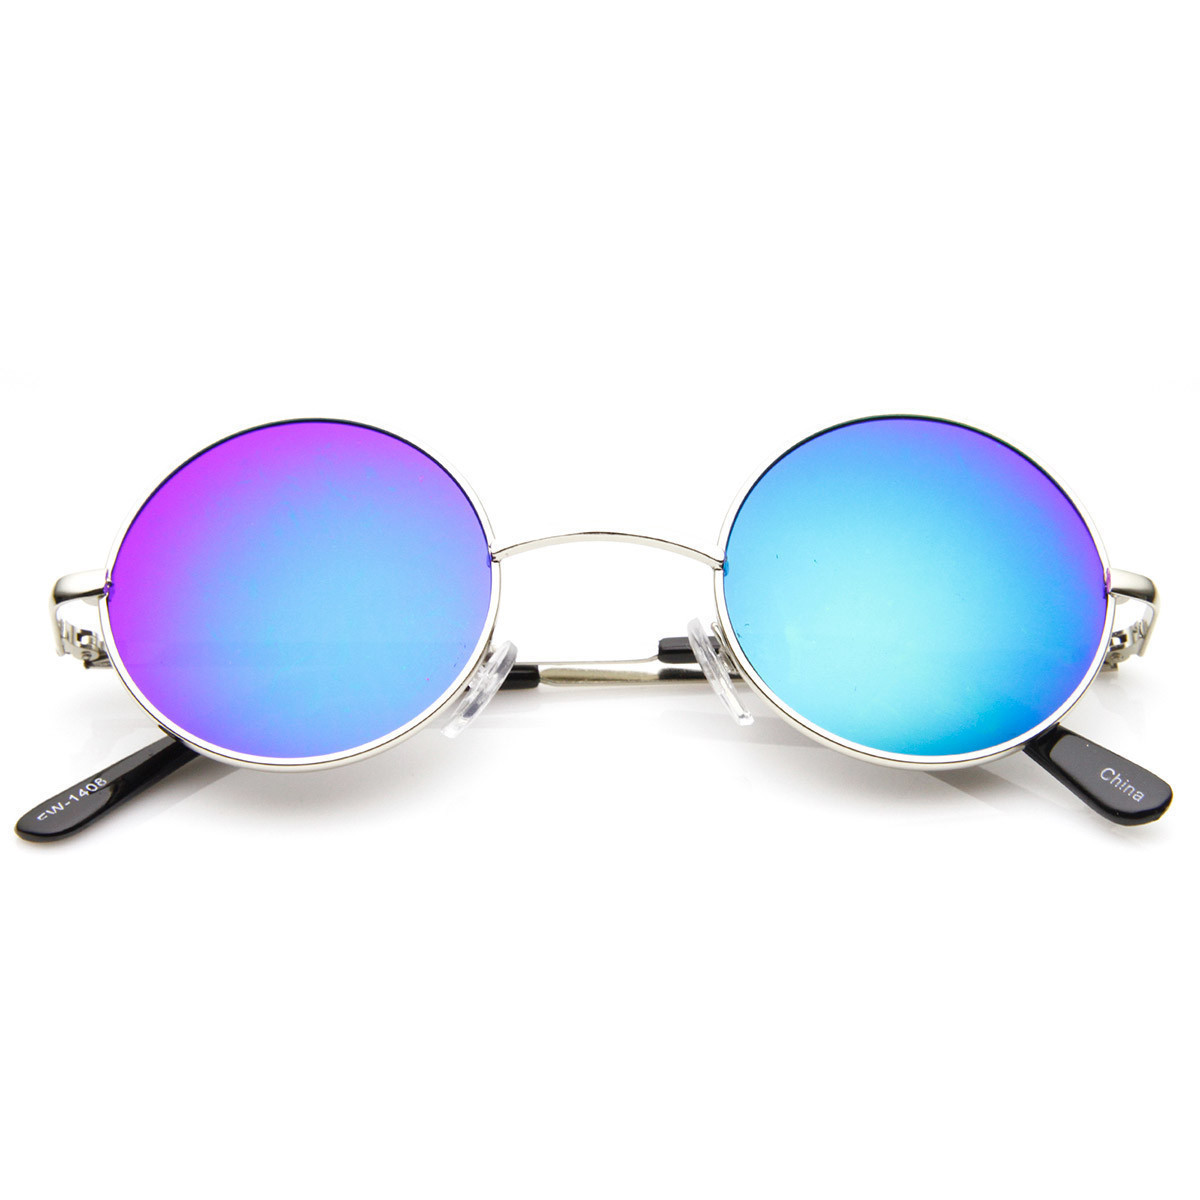 Lennon Style Round Circle Metal Sunglasses With Color Mirror Lens - 1408 - Gold Gold-Mirror